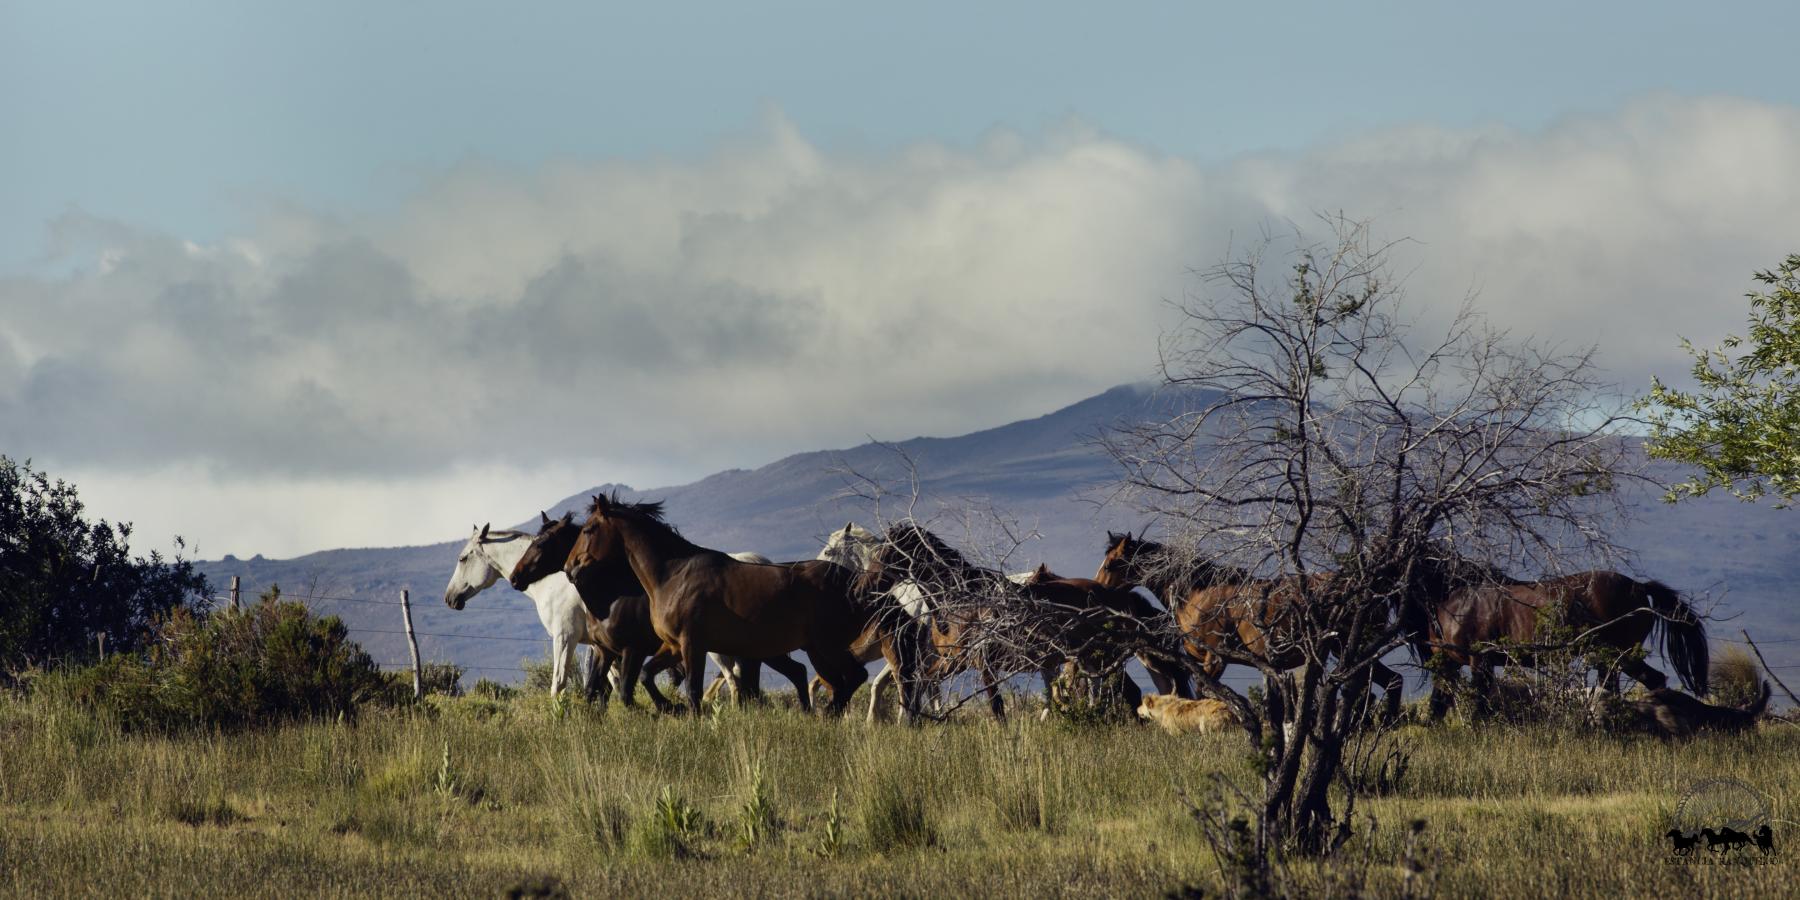 Criollo horses running through the pasture with mountains in the background